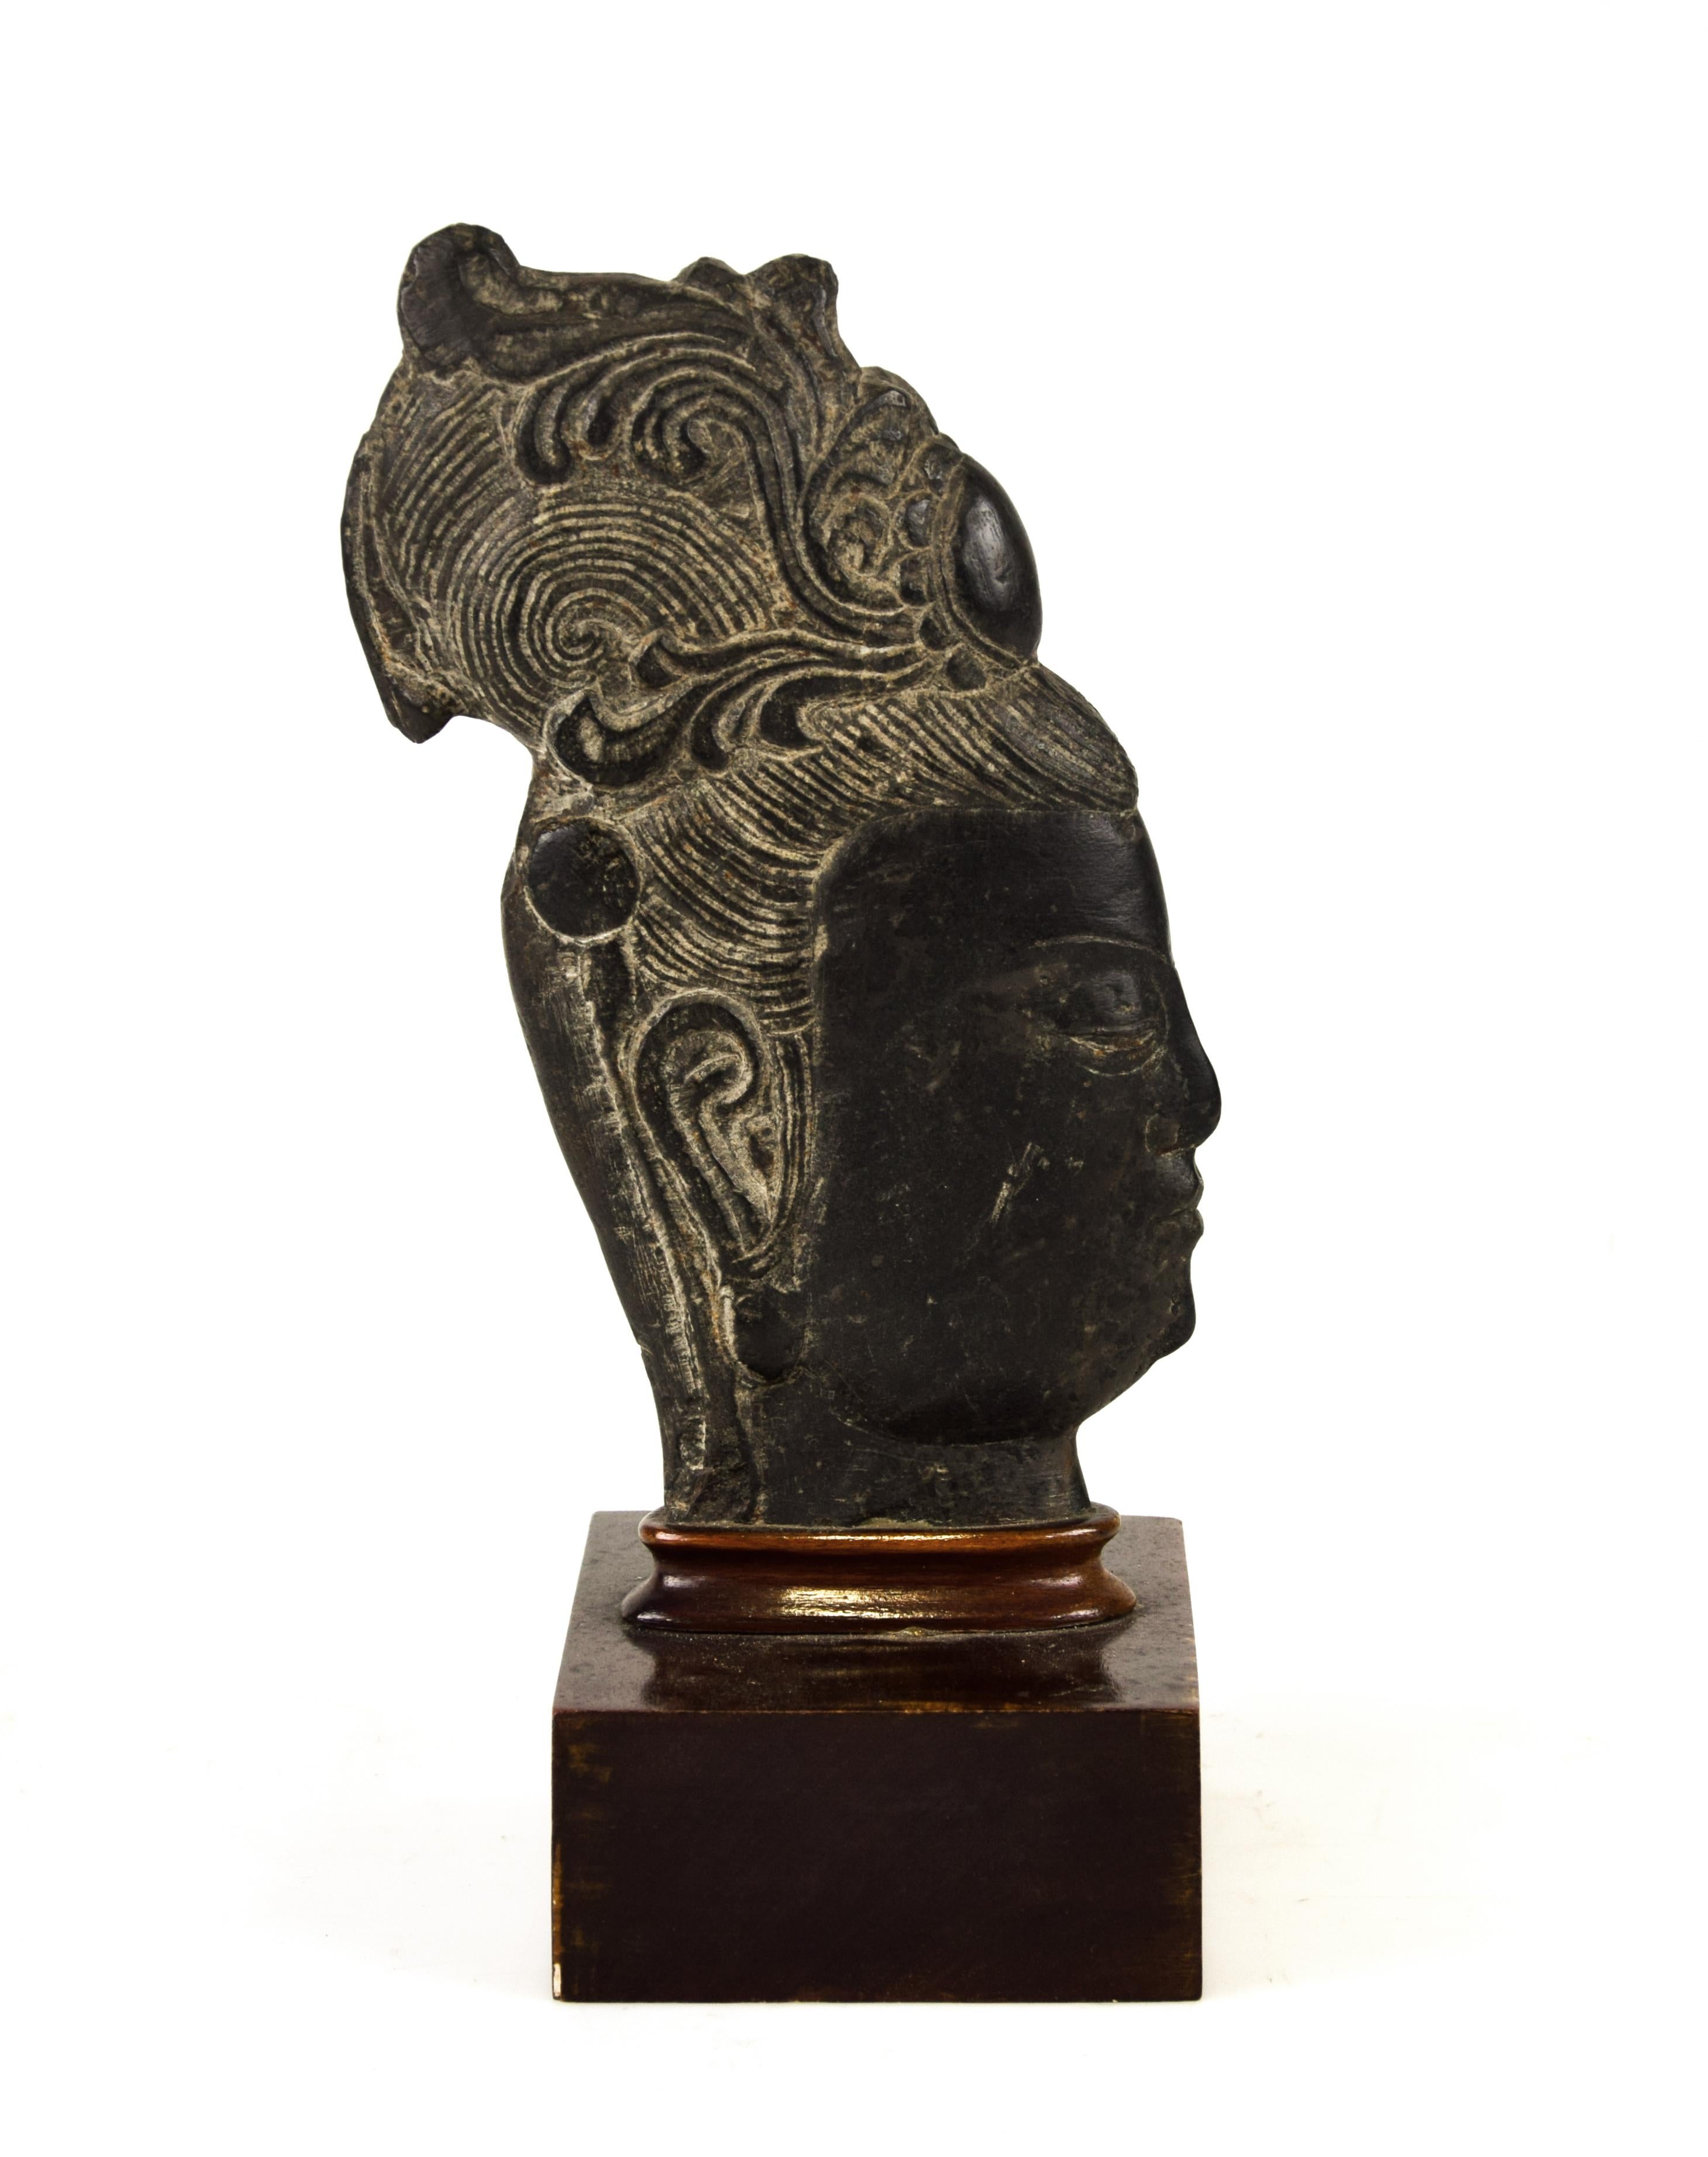 Guanyin's Head is a charming gray-black stone sculpture by an anonymous Chinese master of the 20th century.

Depicting the profile of the divinity's head with the hairstyle in low and high relief, this oriental sculpture has the base in glued